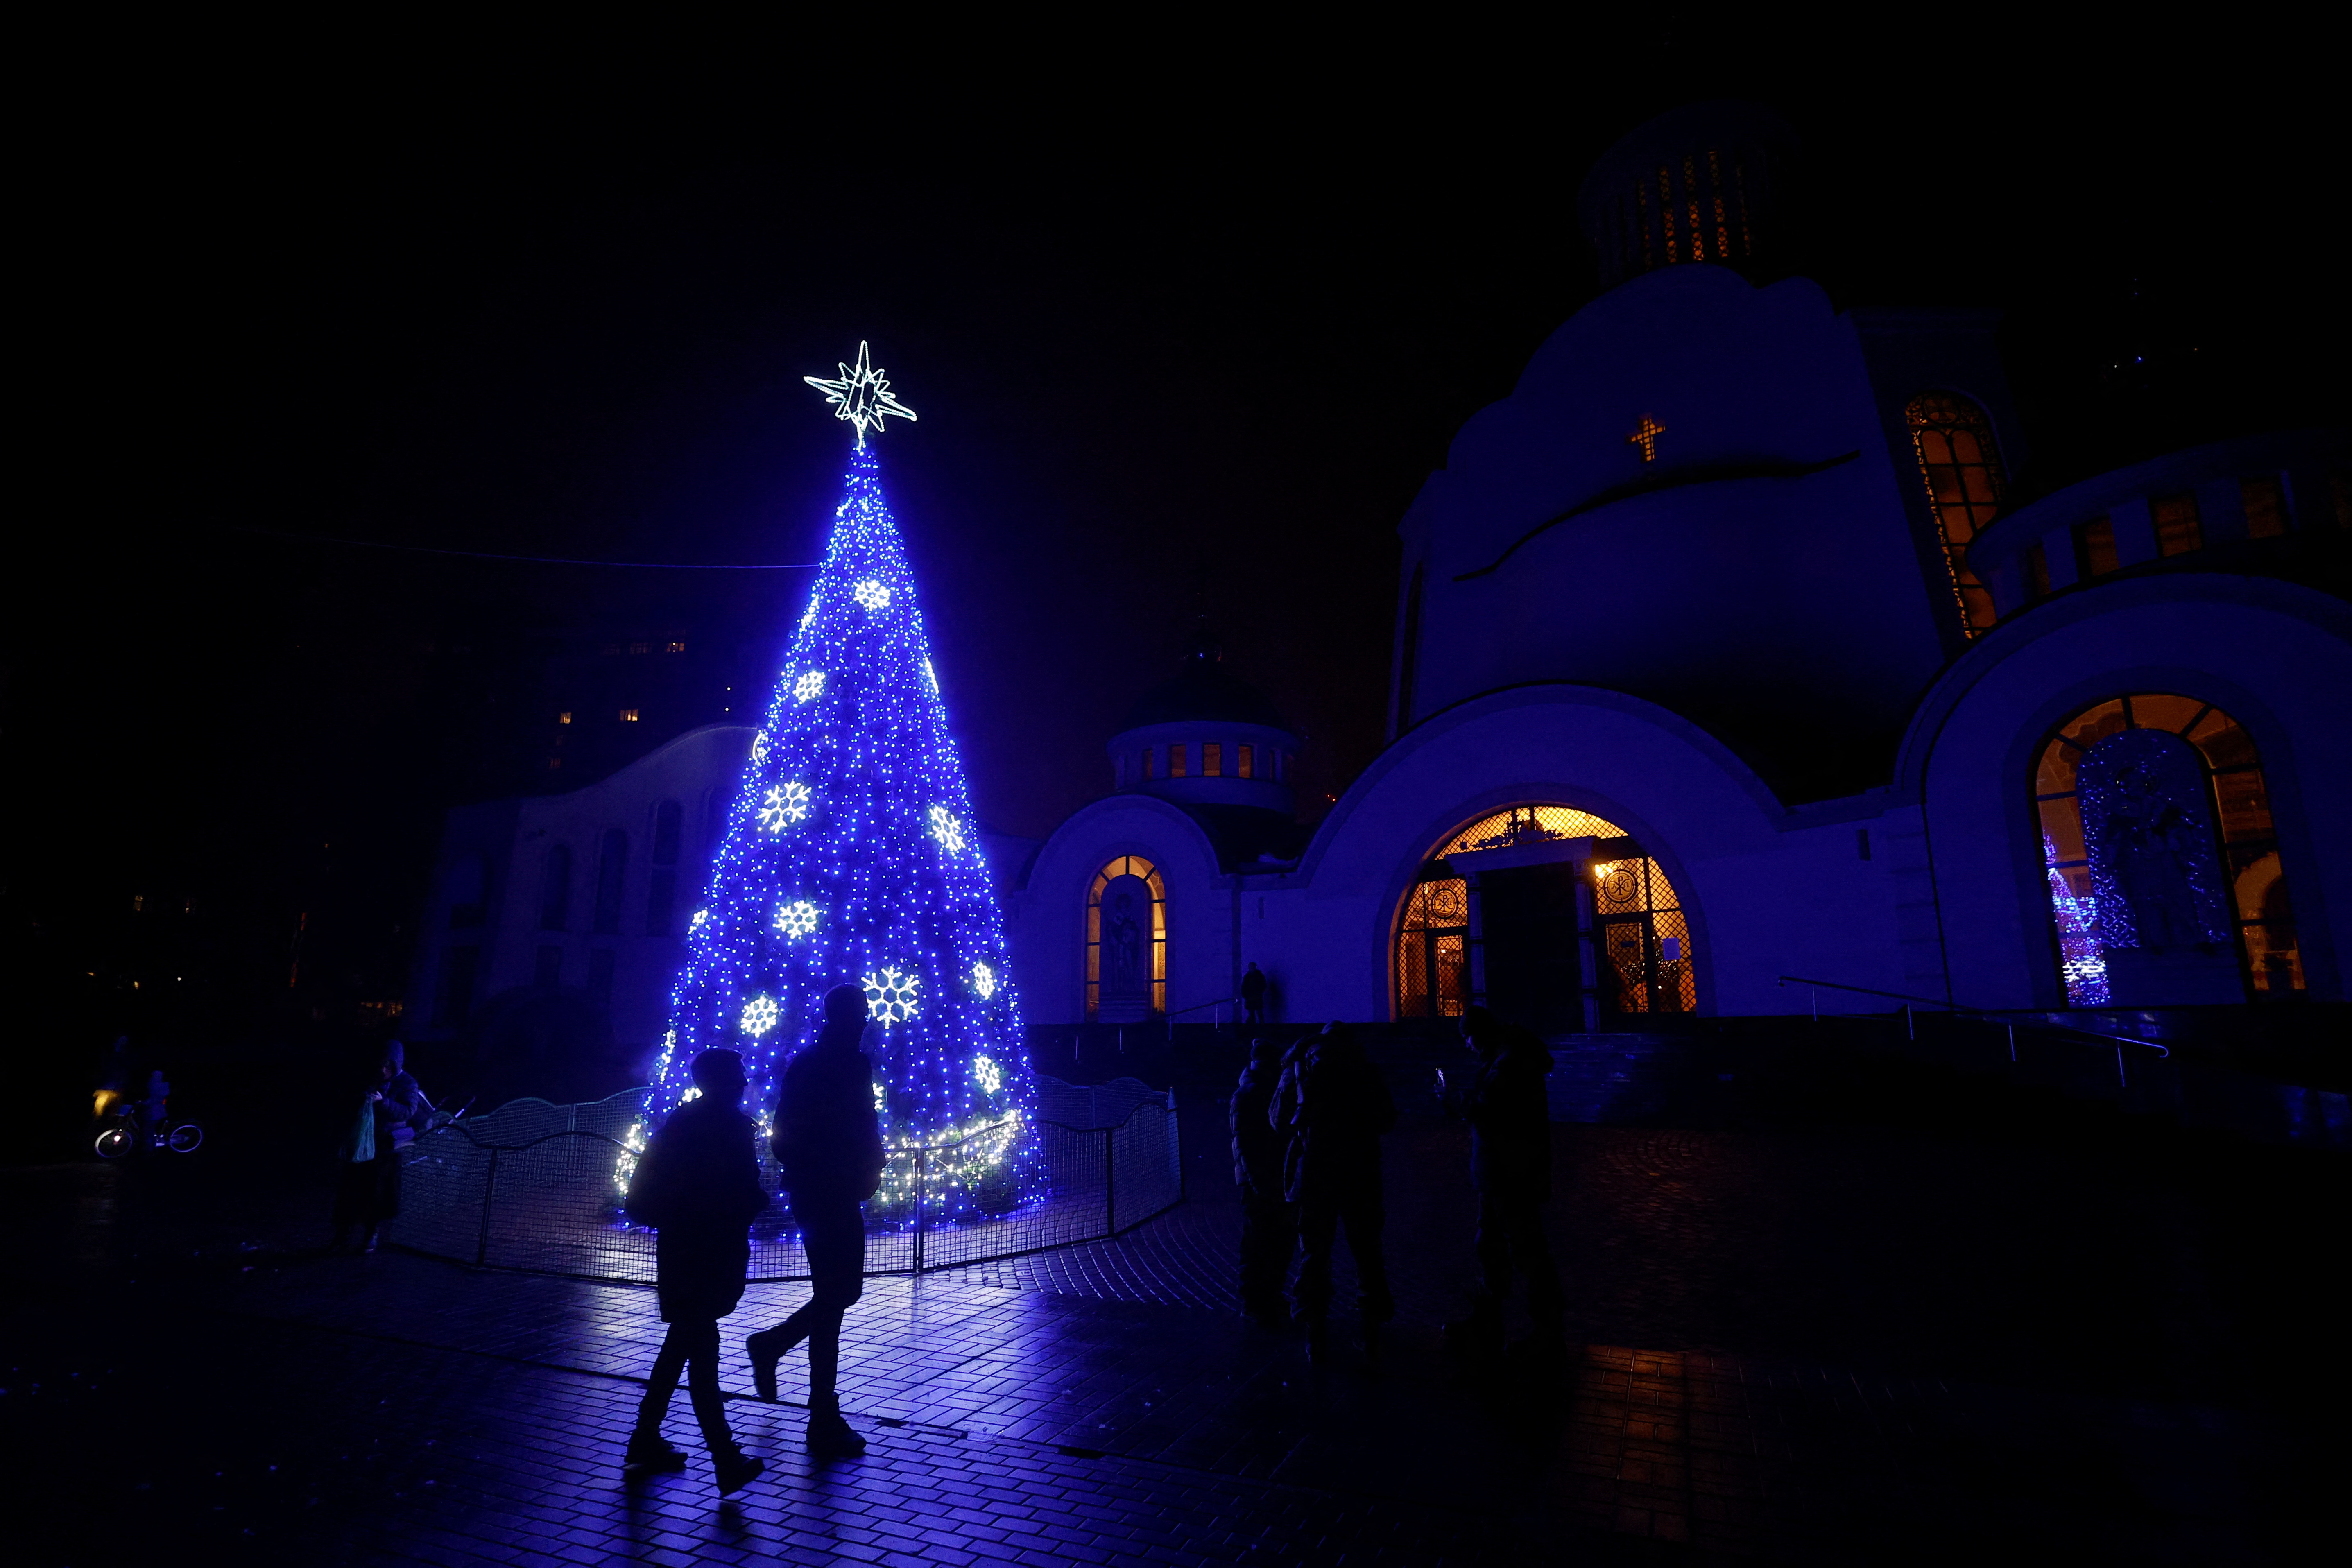 Christmas tree is seen in front of an Orthodox cathedral during a service on the eve of Christmas in Kyiv